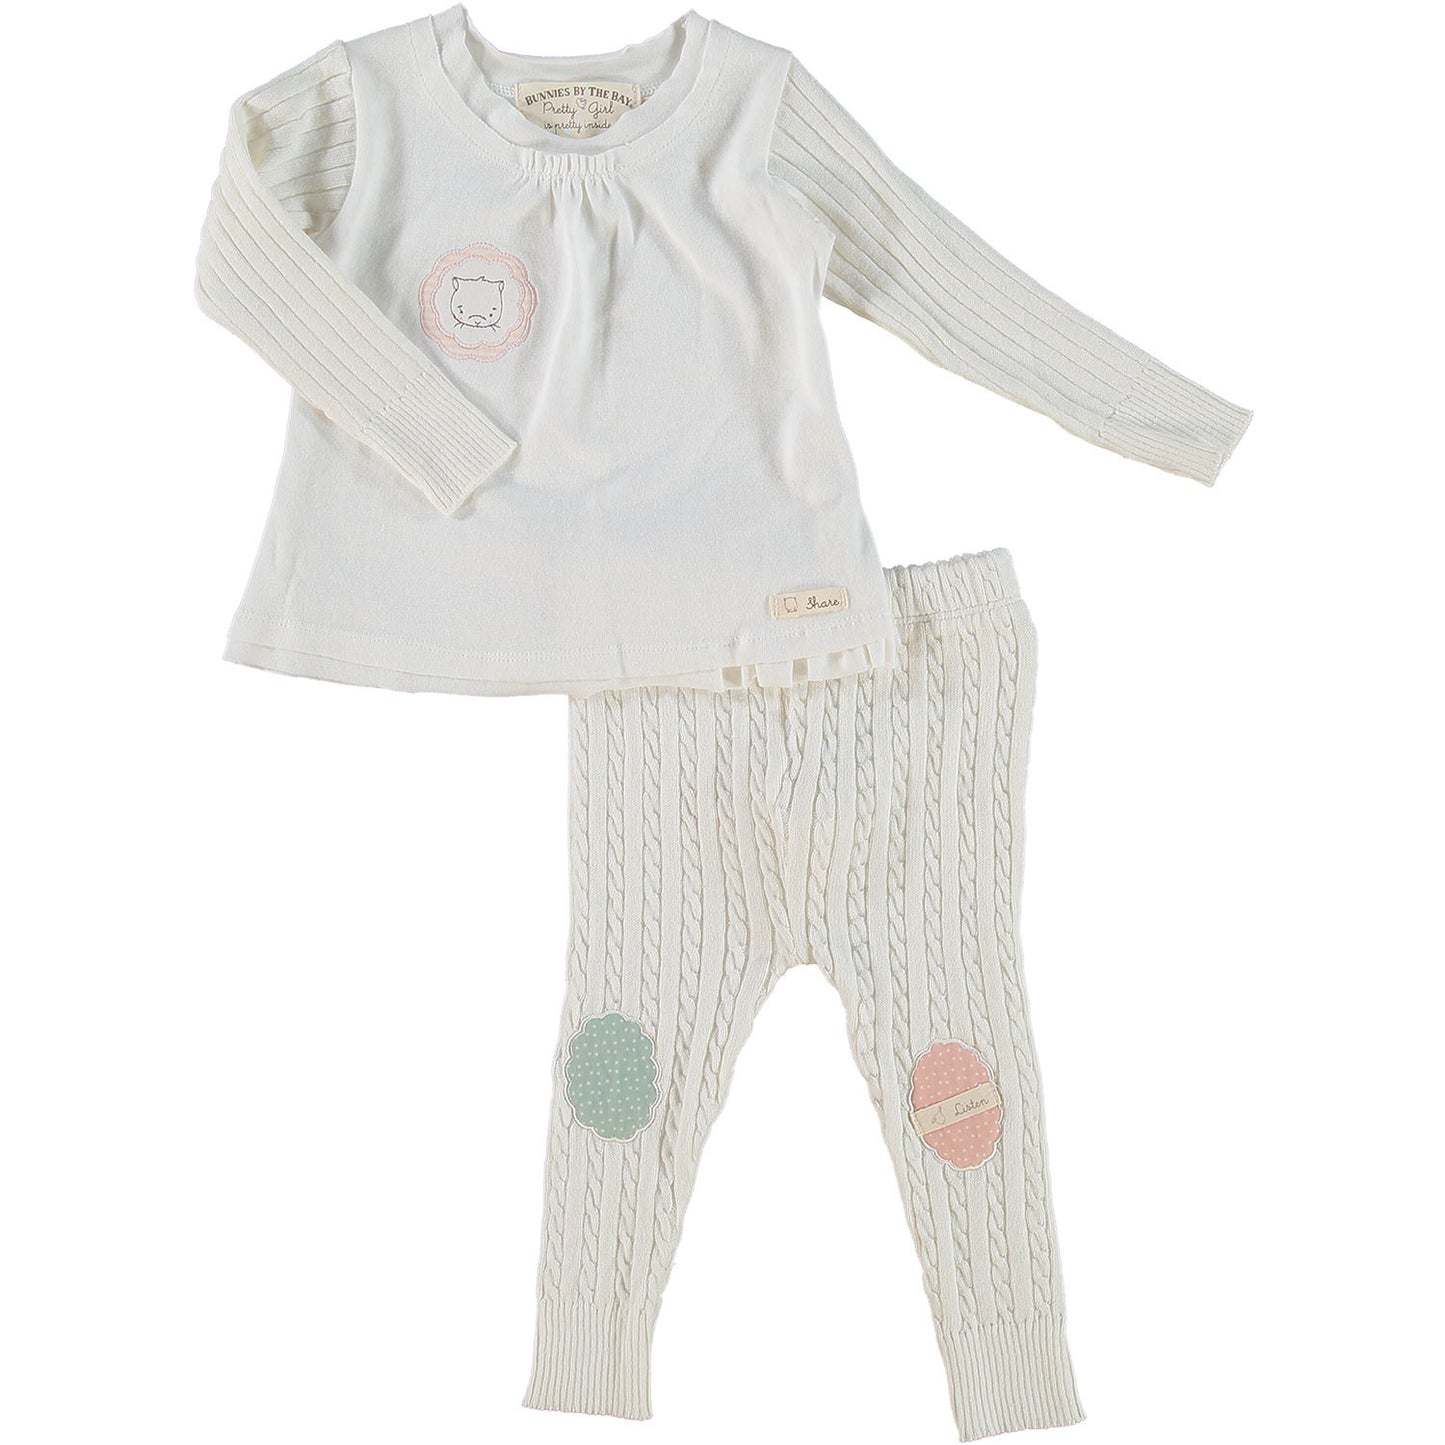 Whipped Cream Top and Leggings Set 9-12 months